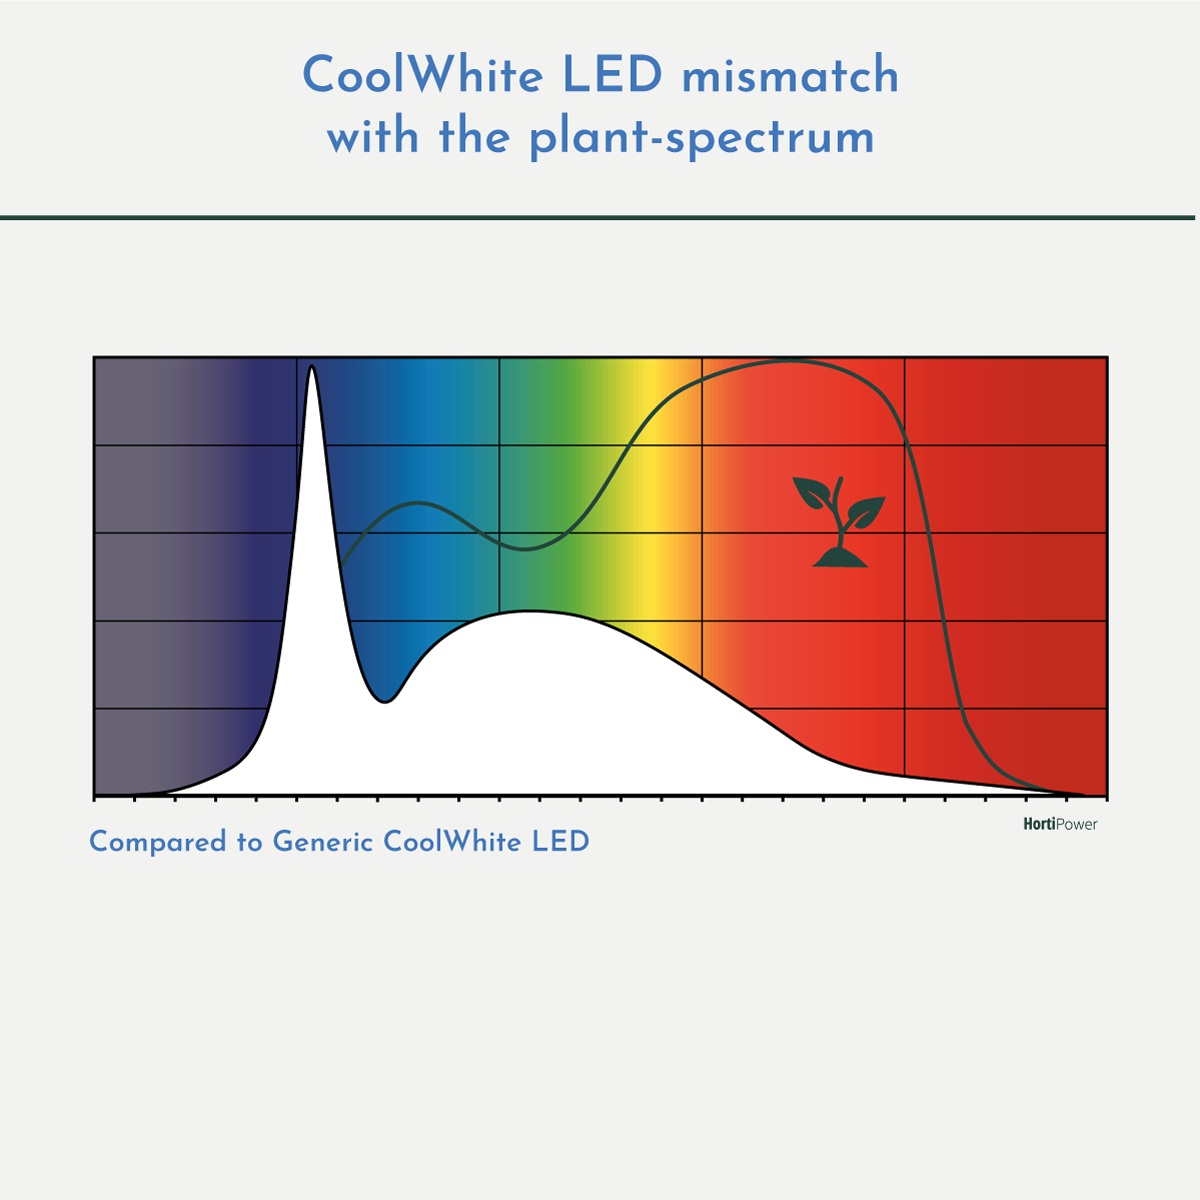 Coolwhite LED light spectrum and the plant spectrum